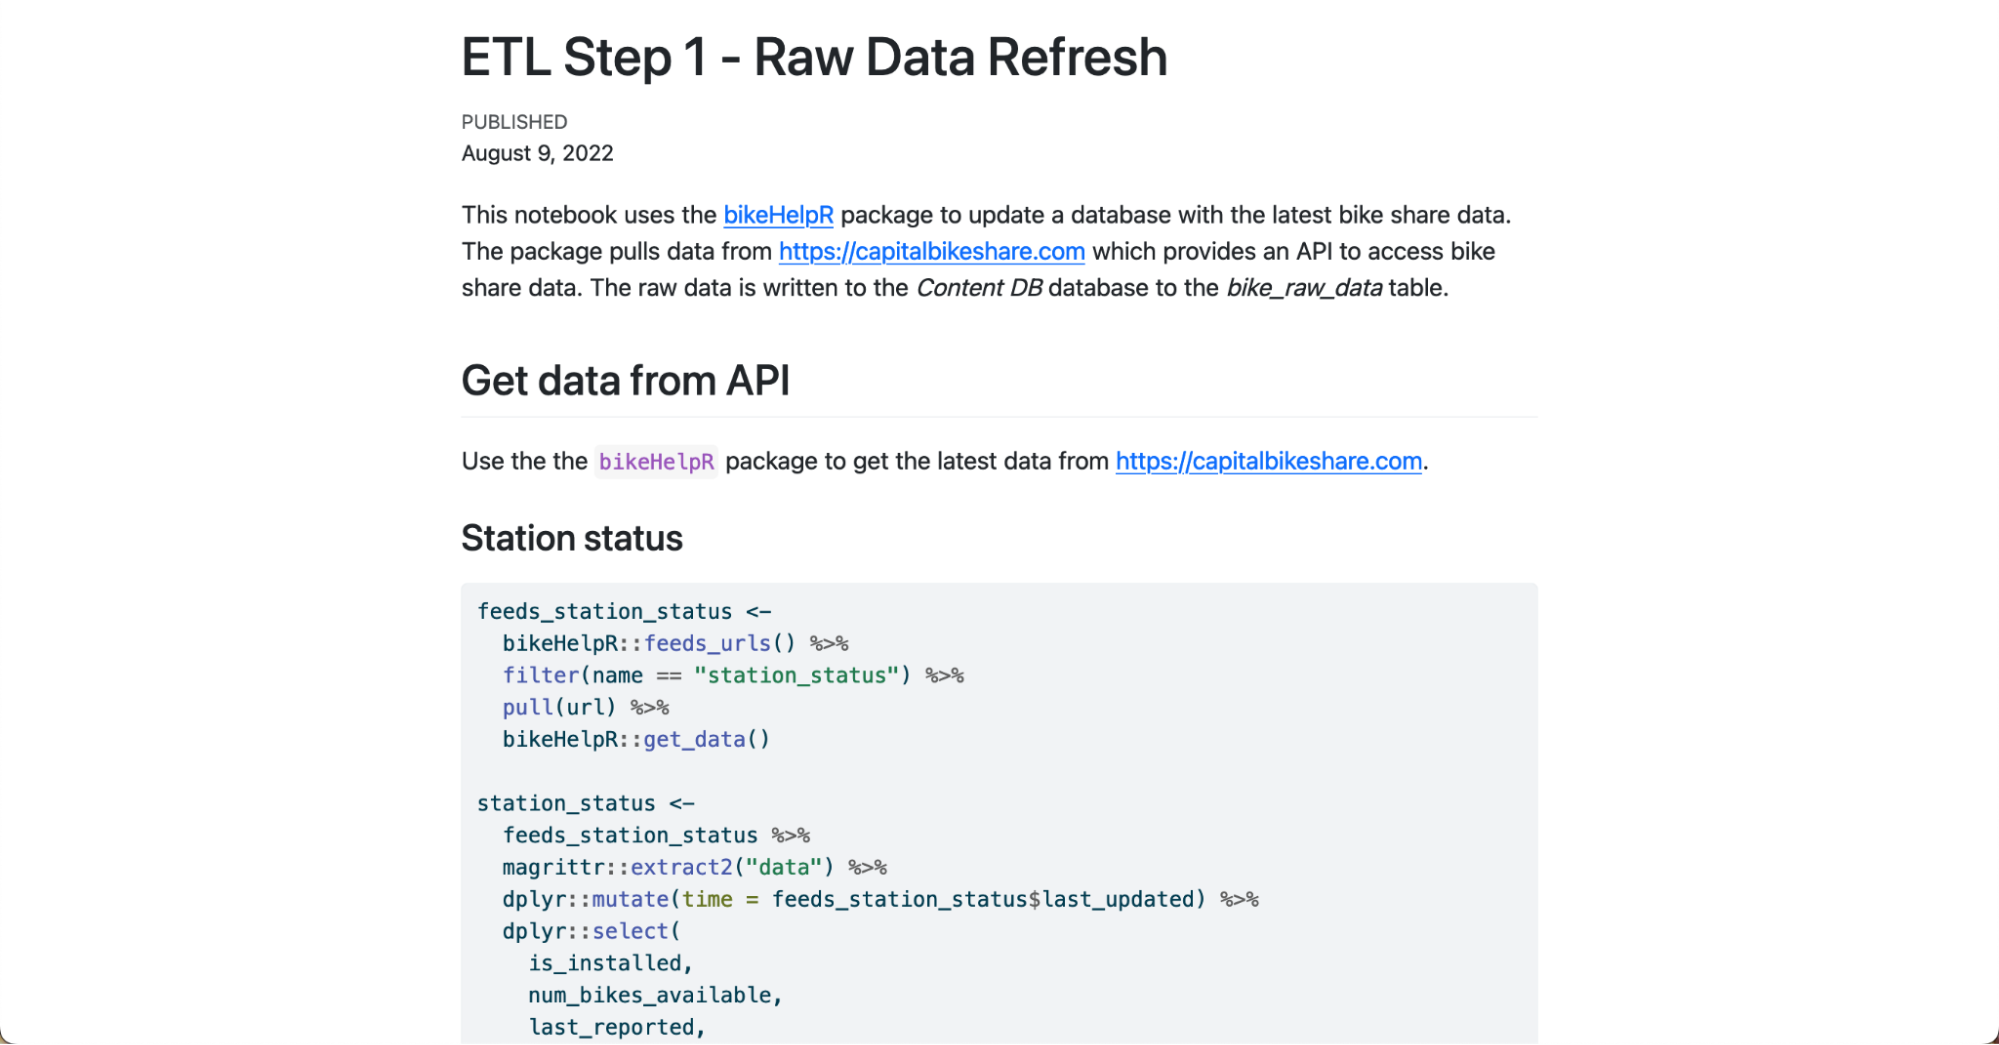 A Quarto document with the title ETL Step 1 Raw Data Refresh. The document shows the description and code